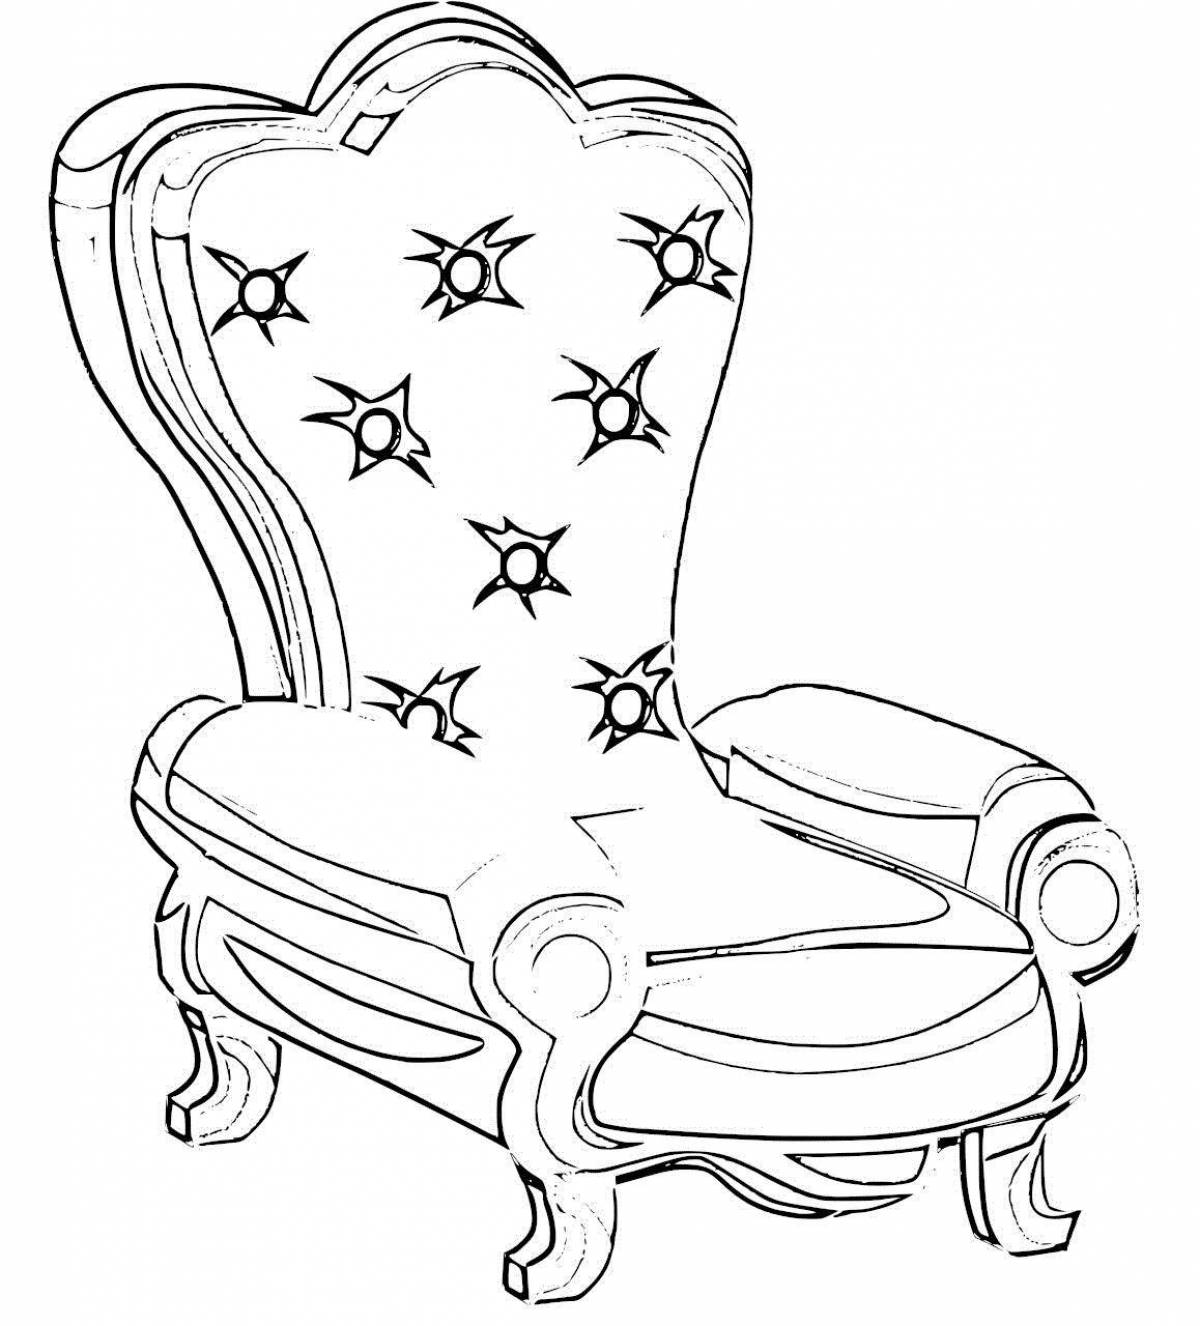 Coloring book shiny chair for children